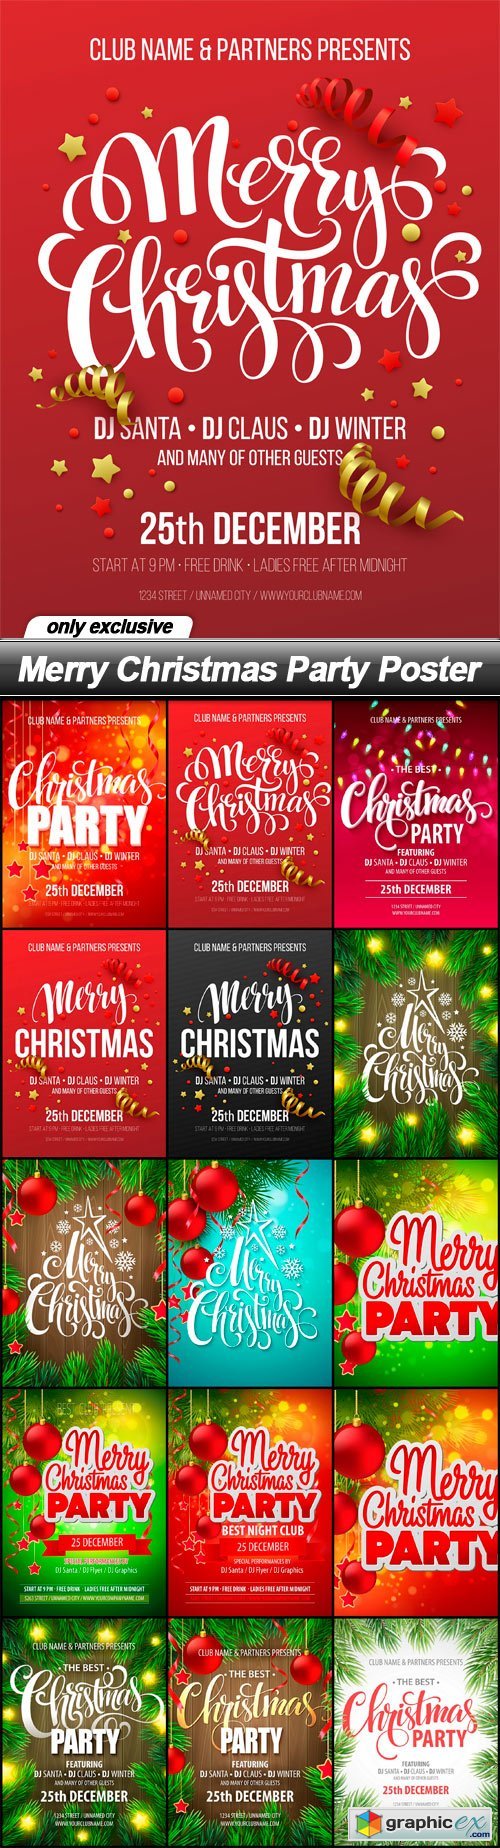 Merry Christmas Party Poster - 15 EPS